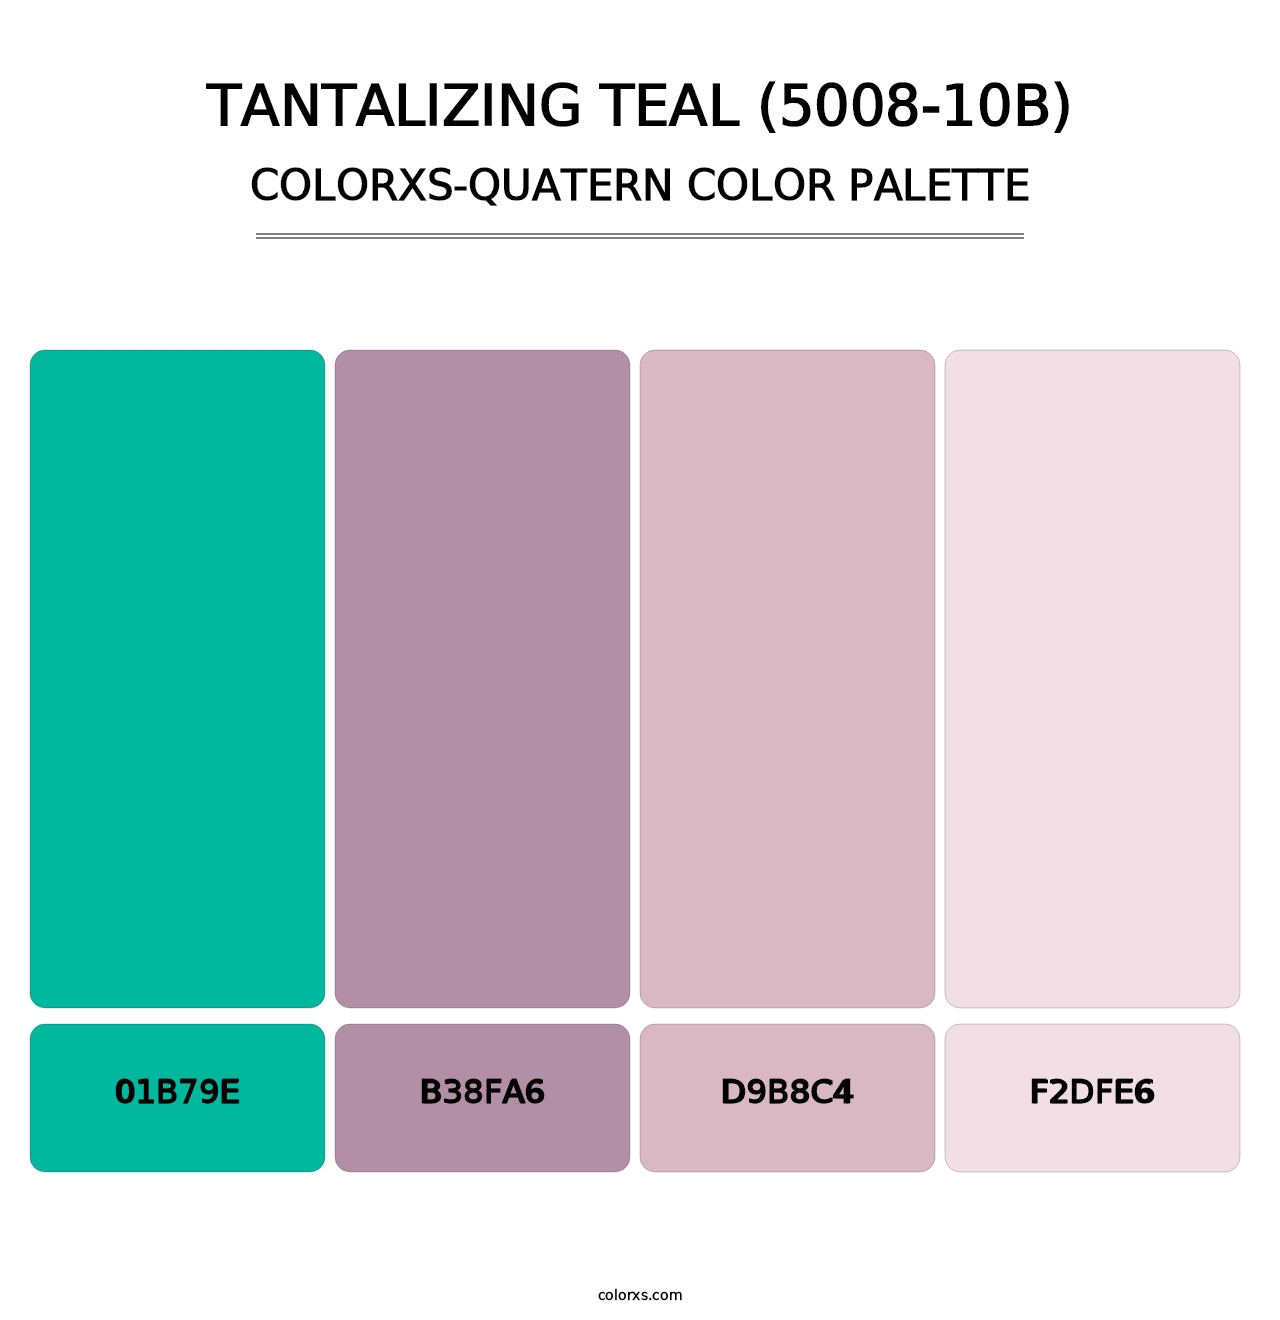 Tantalizing Teal (5008-10B) - Colorxs Quatern Palette